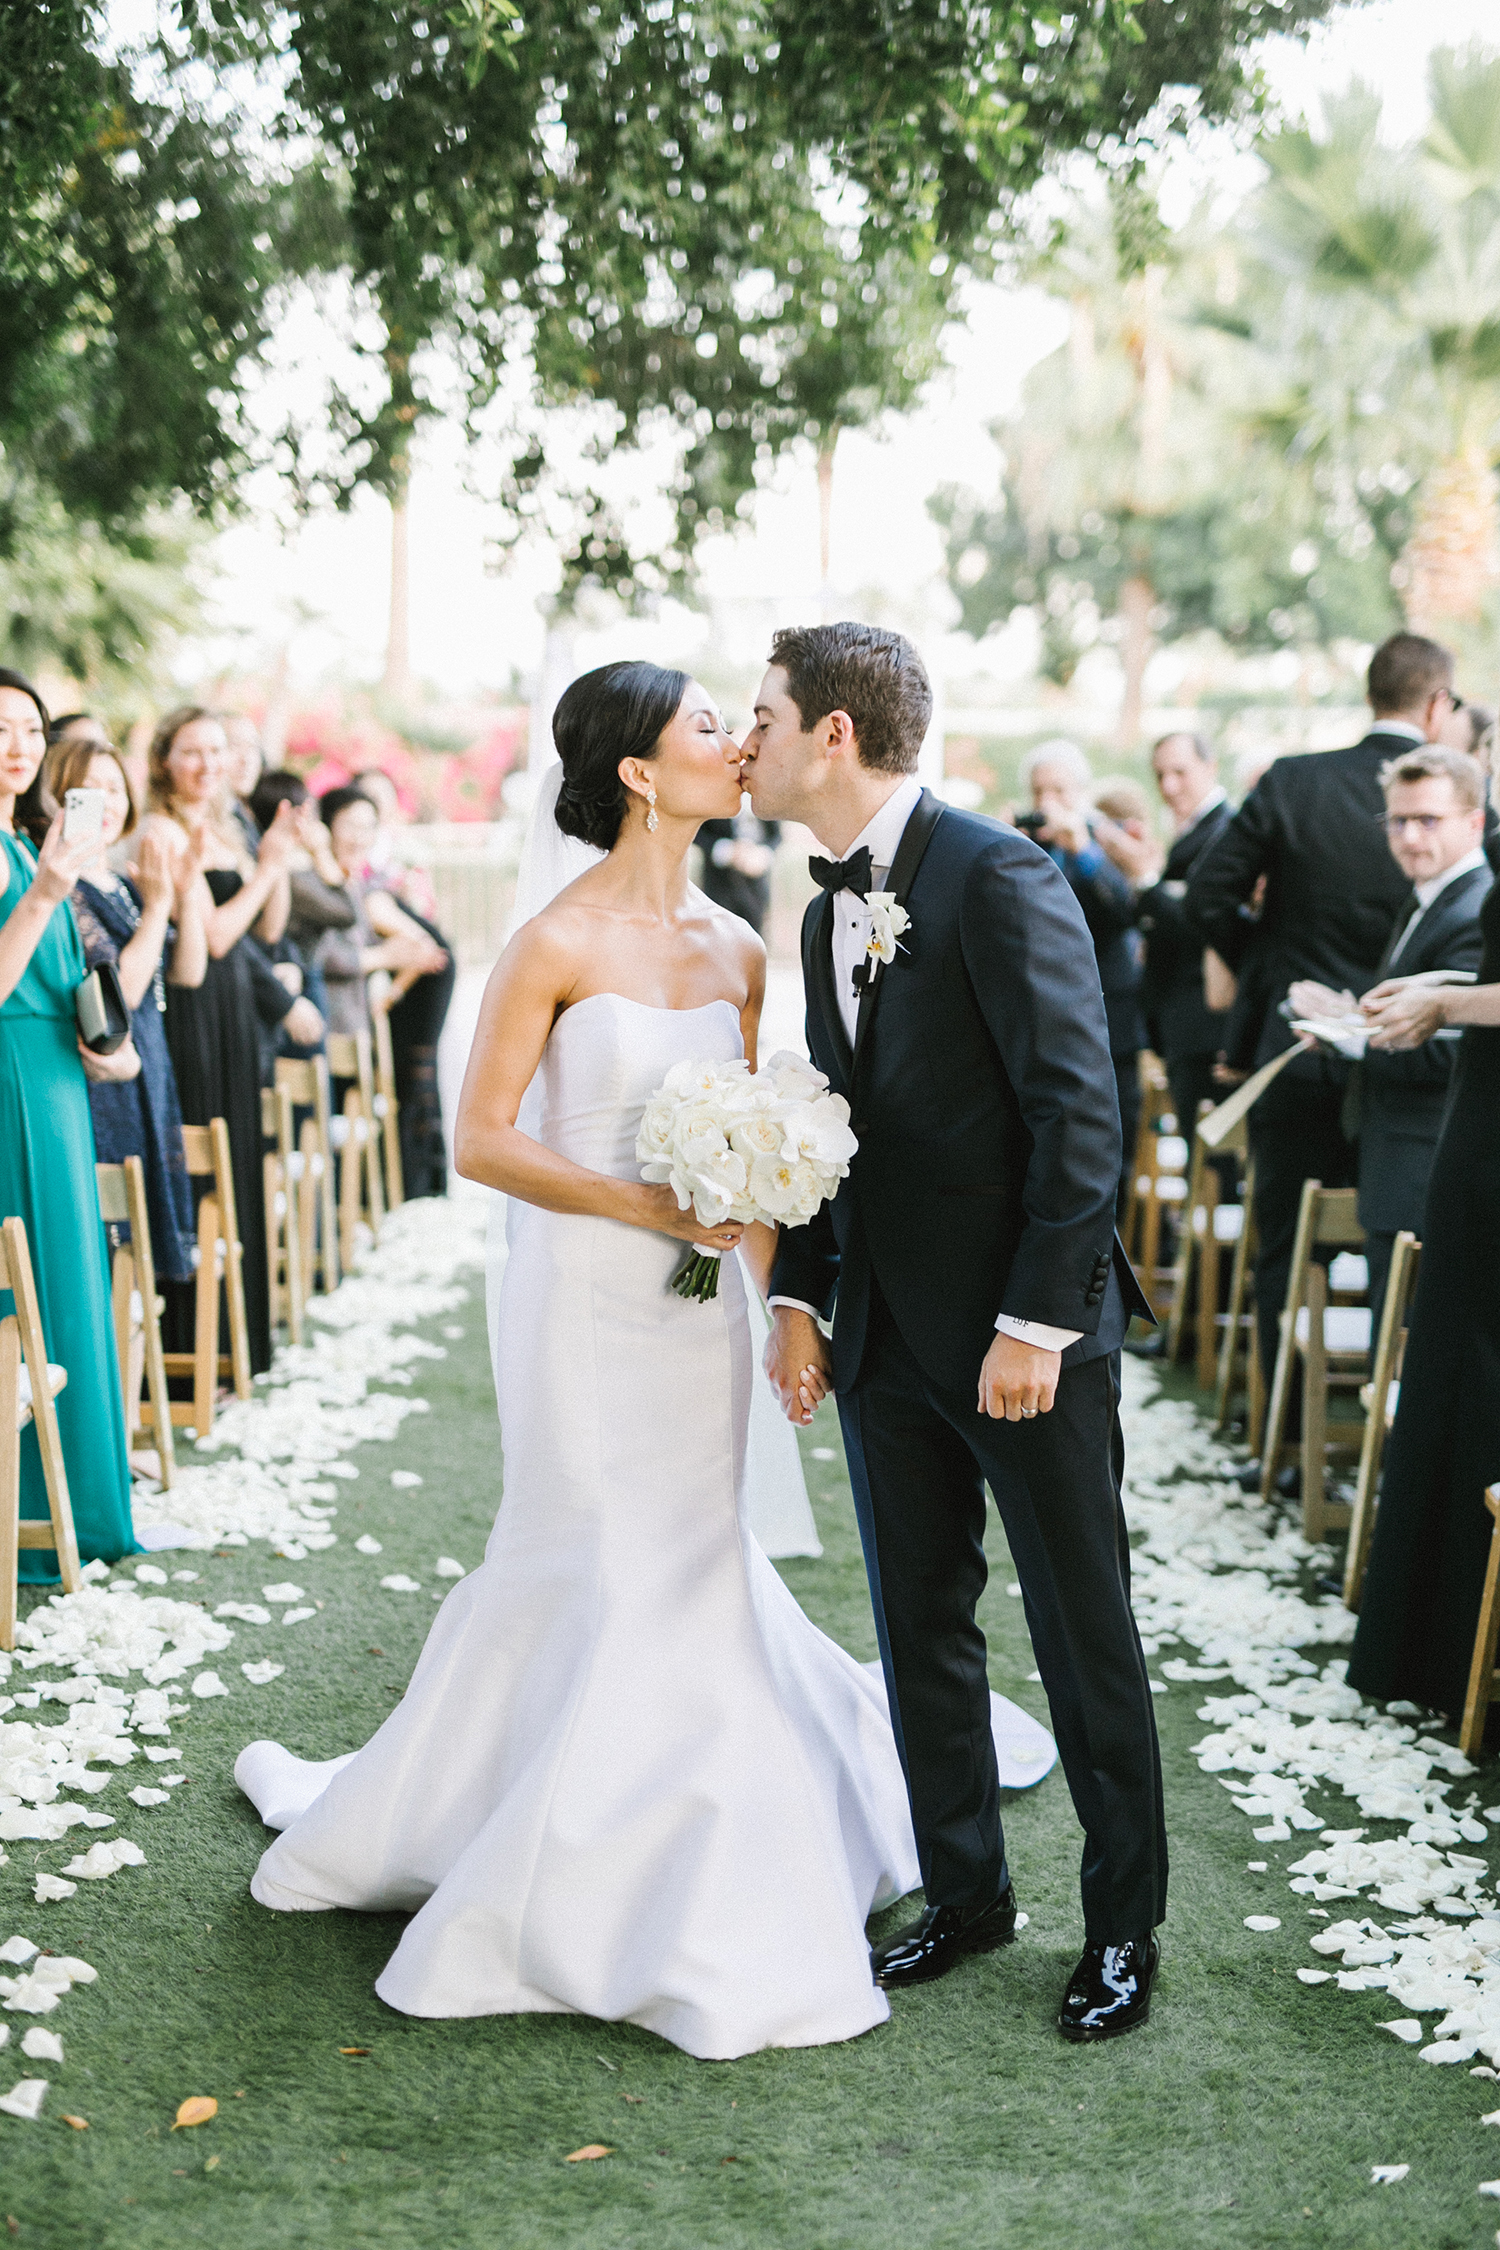 A Phoenician Resort Wedding in Arizona. Diana and Dan's big day was oozing elegance in every moment and detail. Catch Part One of their wedding | KatinaPhotography.com #PhoenicianWedding #ThePhoenicianResort #PhoenicianResort #ScottsdaleArizona #ScottsdaleArizonaWedding #ScottsdaleArizonaWeddingVenues #ArizonaWeddingPhotographer #WeddingPhotographyInspiration #WeddingStylingIdeas #ArizonaWeddingIdeas #ArizonaWeddingPhotography #WeddingIdeas #WeddingDecorations #WeddingDress #ArizonaWedding #ArizonaPhotographer